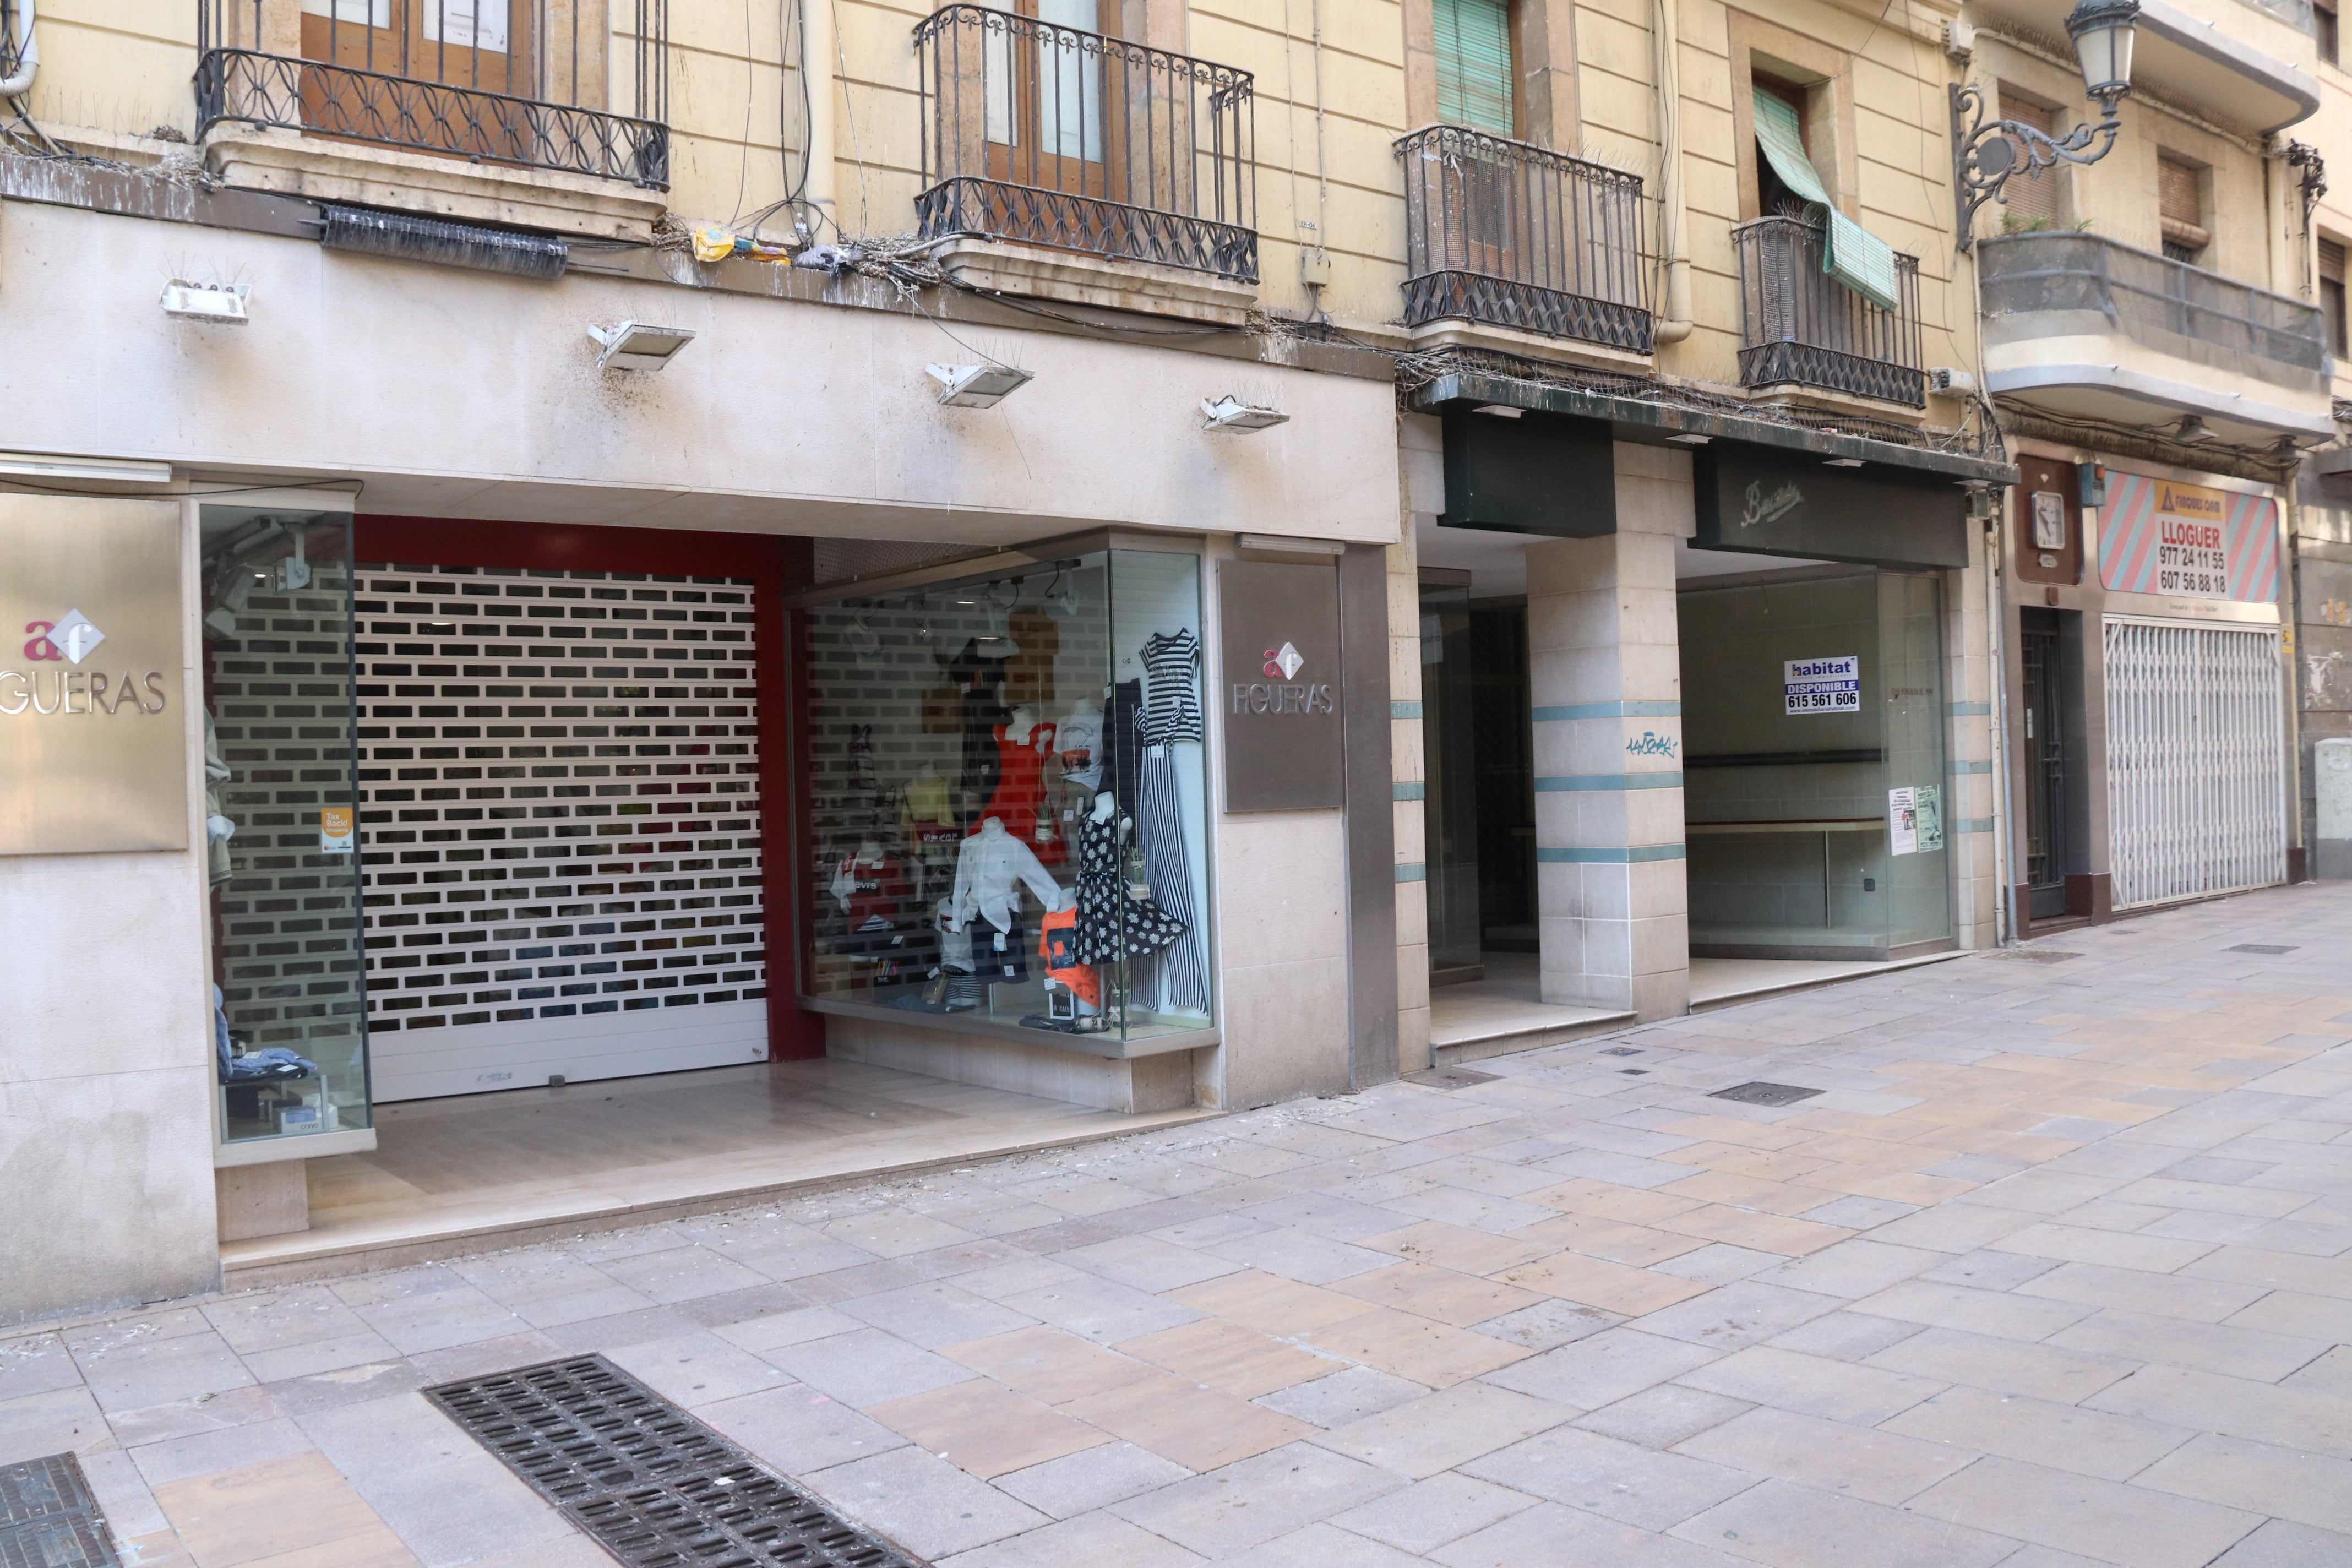 Closed shops and businesses in Tarragona due to the Covid-19 pandemic (by Eloi Tost)